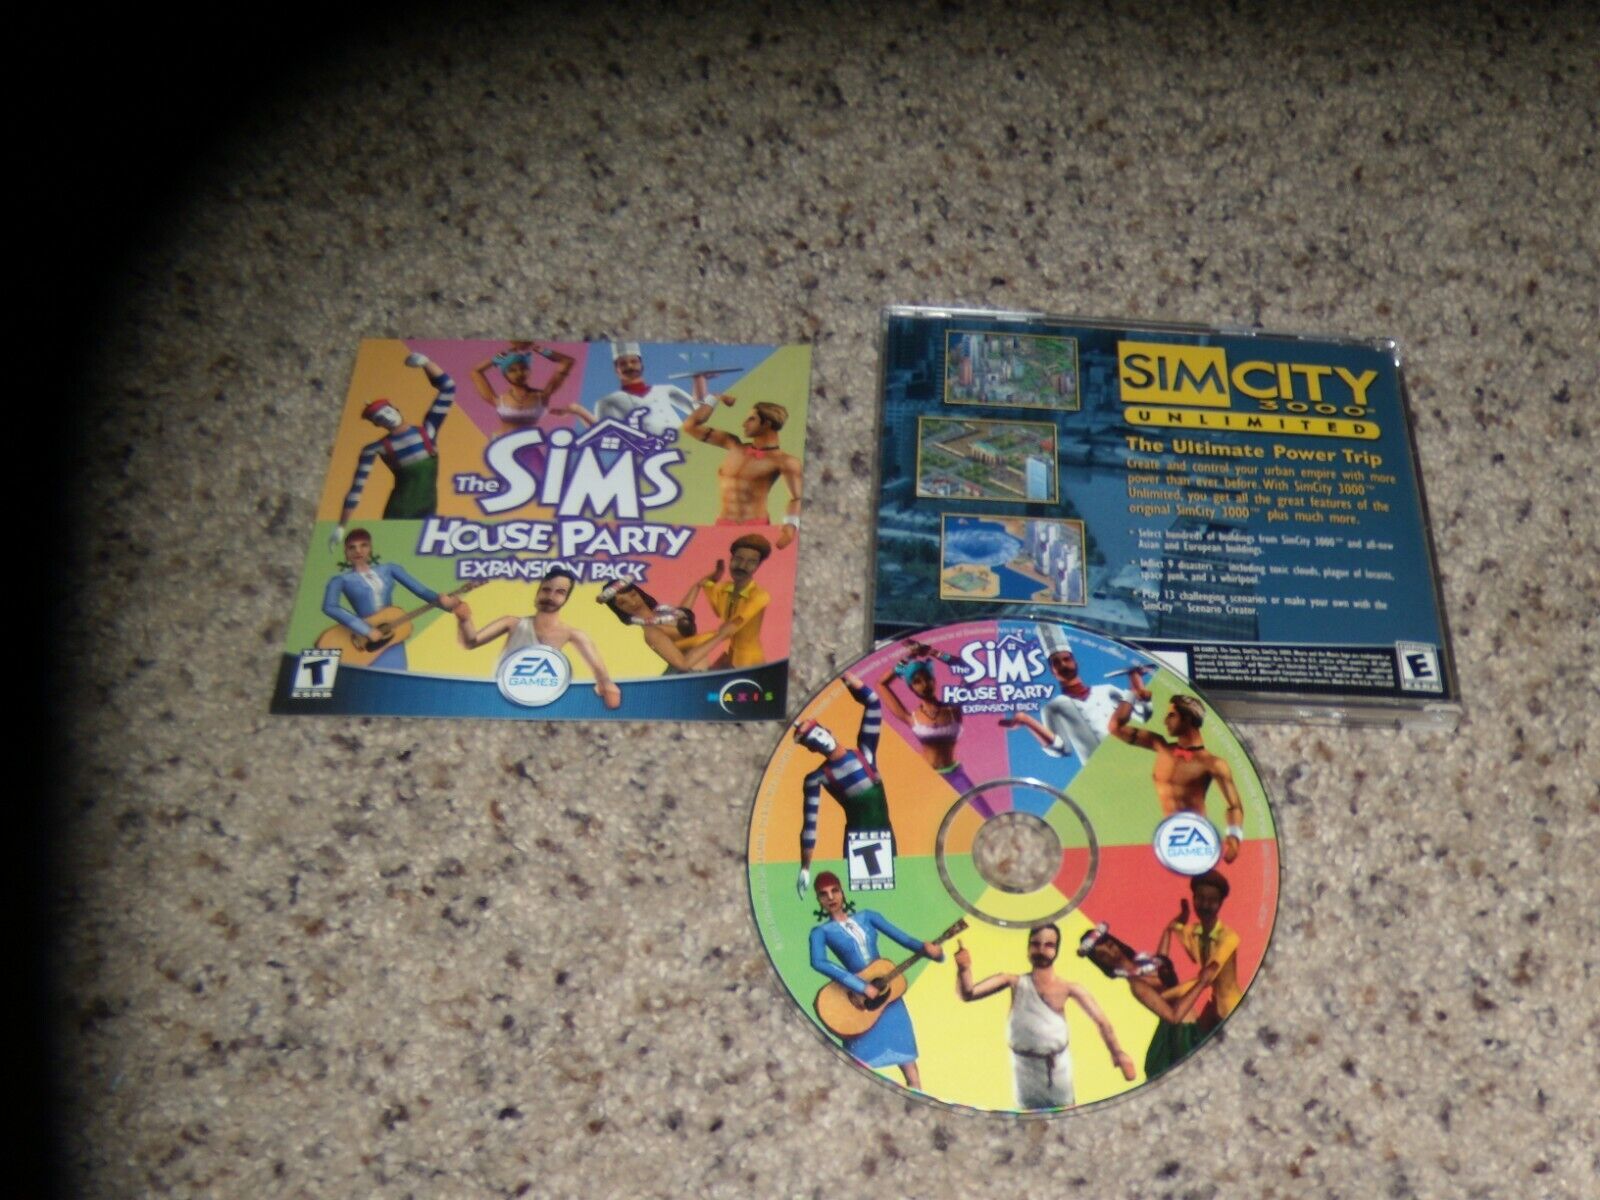 The Sims House Party Expansion Pack (PC, 2001) game